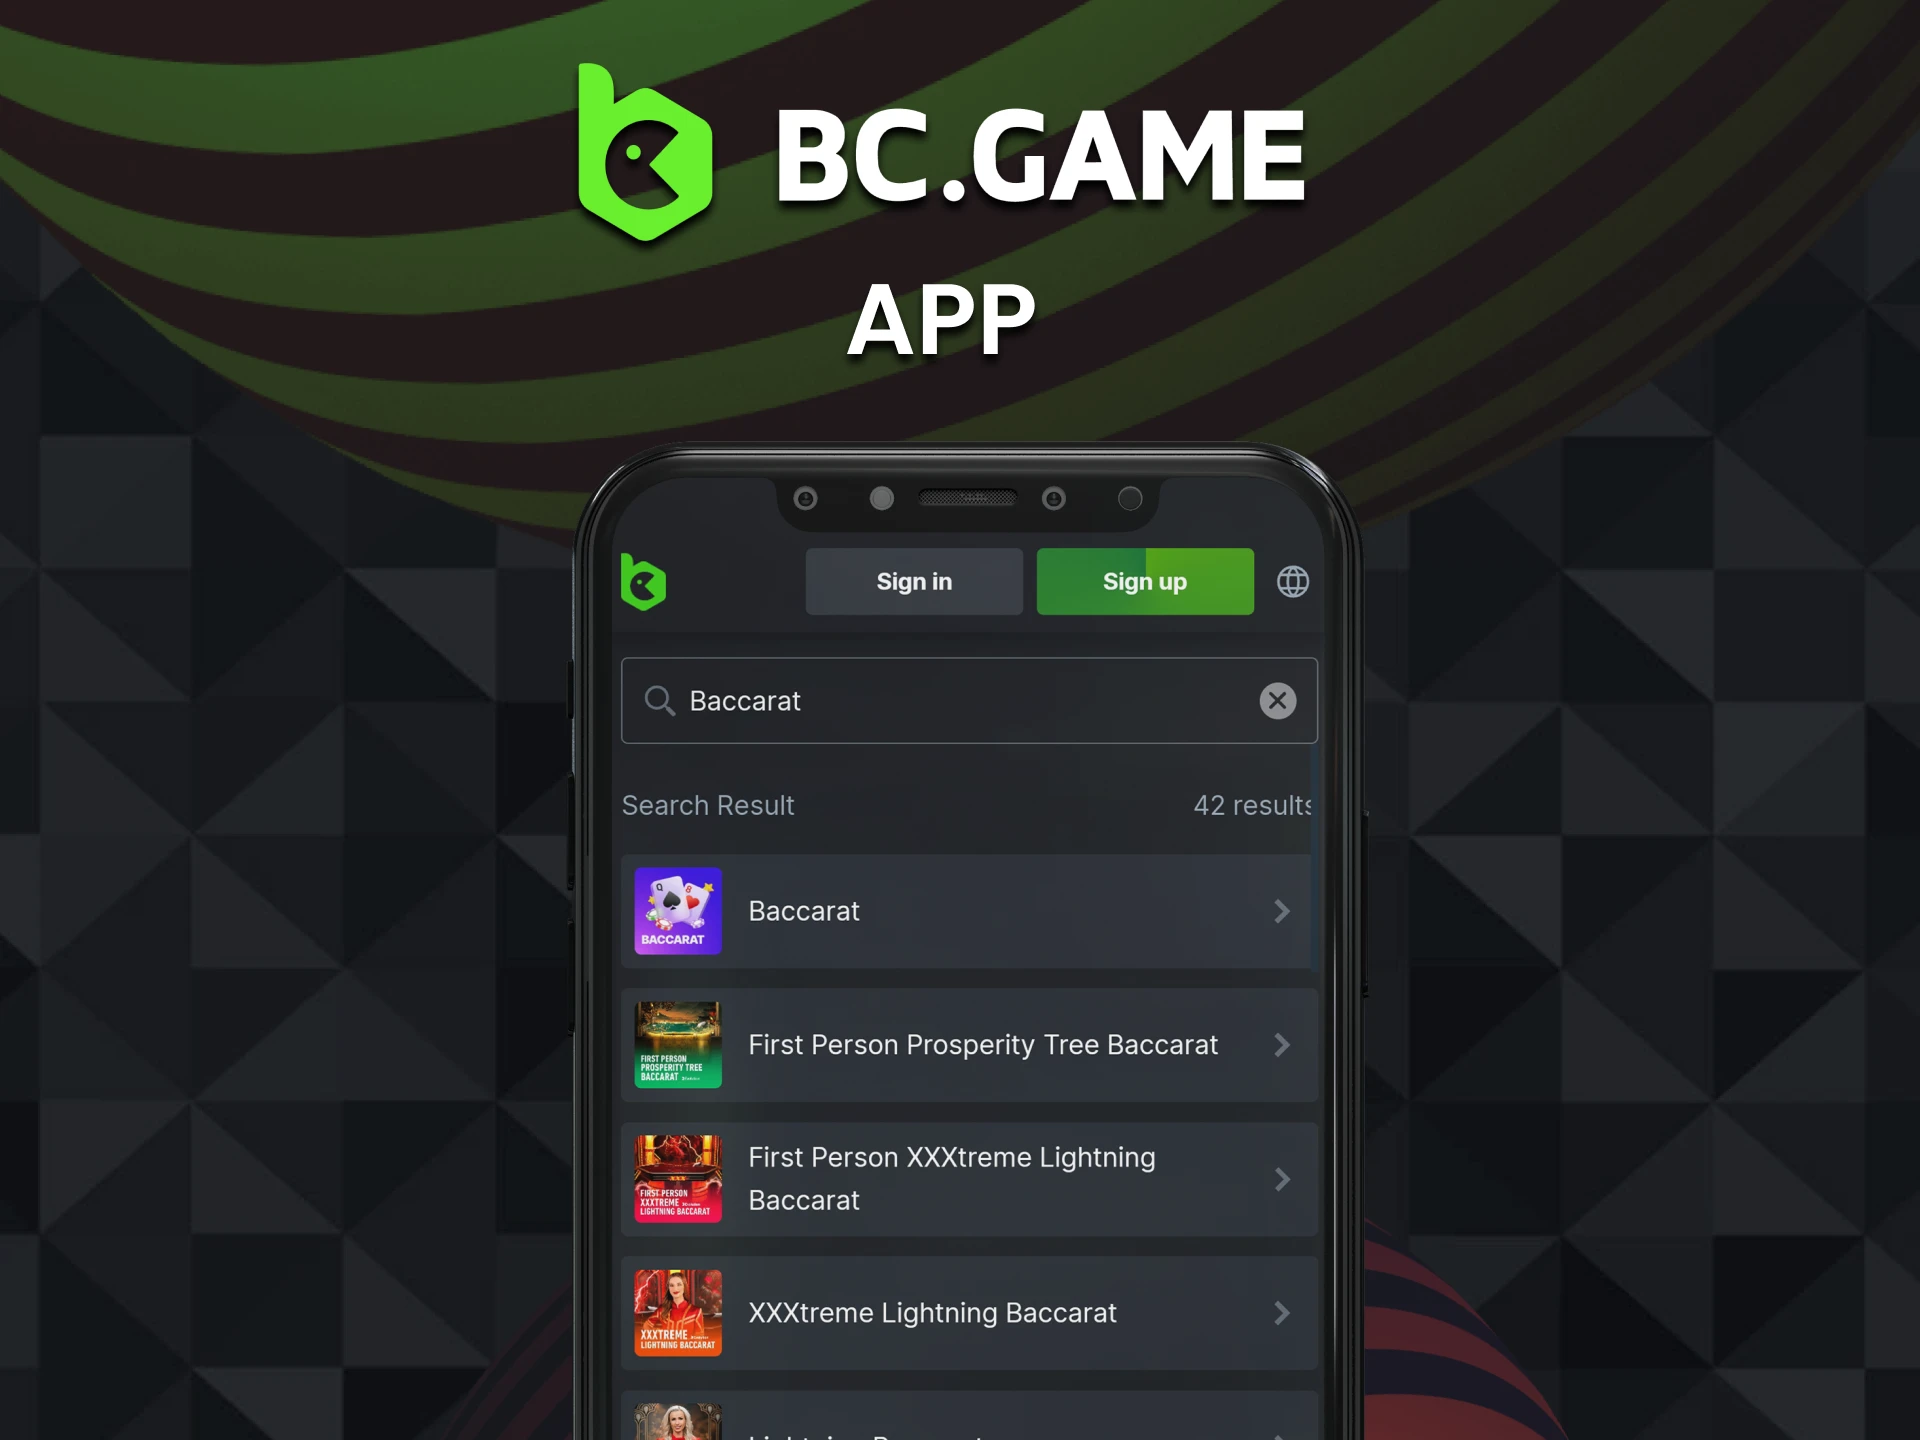 Use your smartphone to play baccarat through the BC Game app.